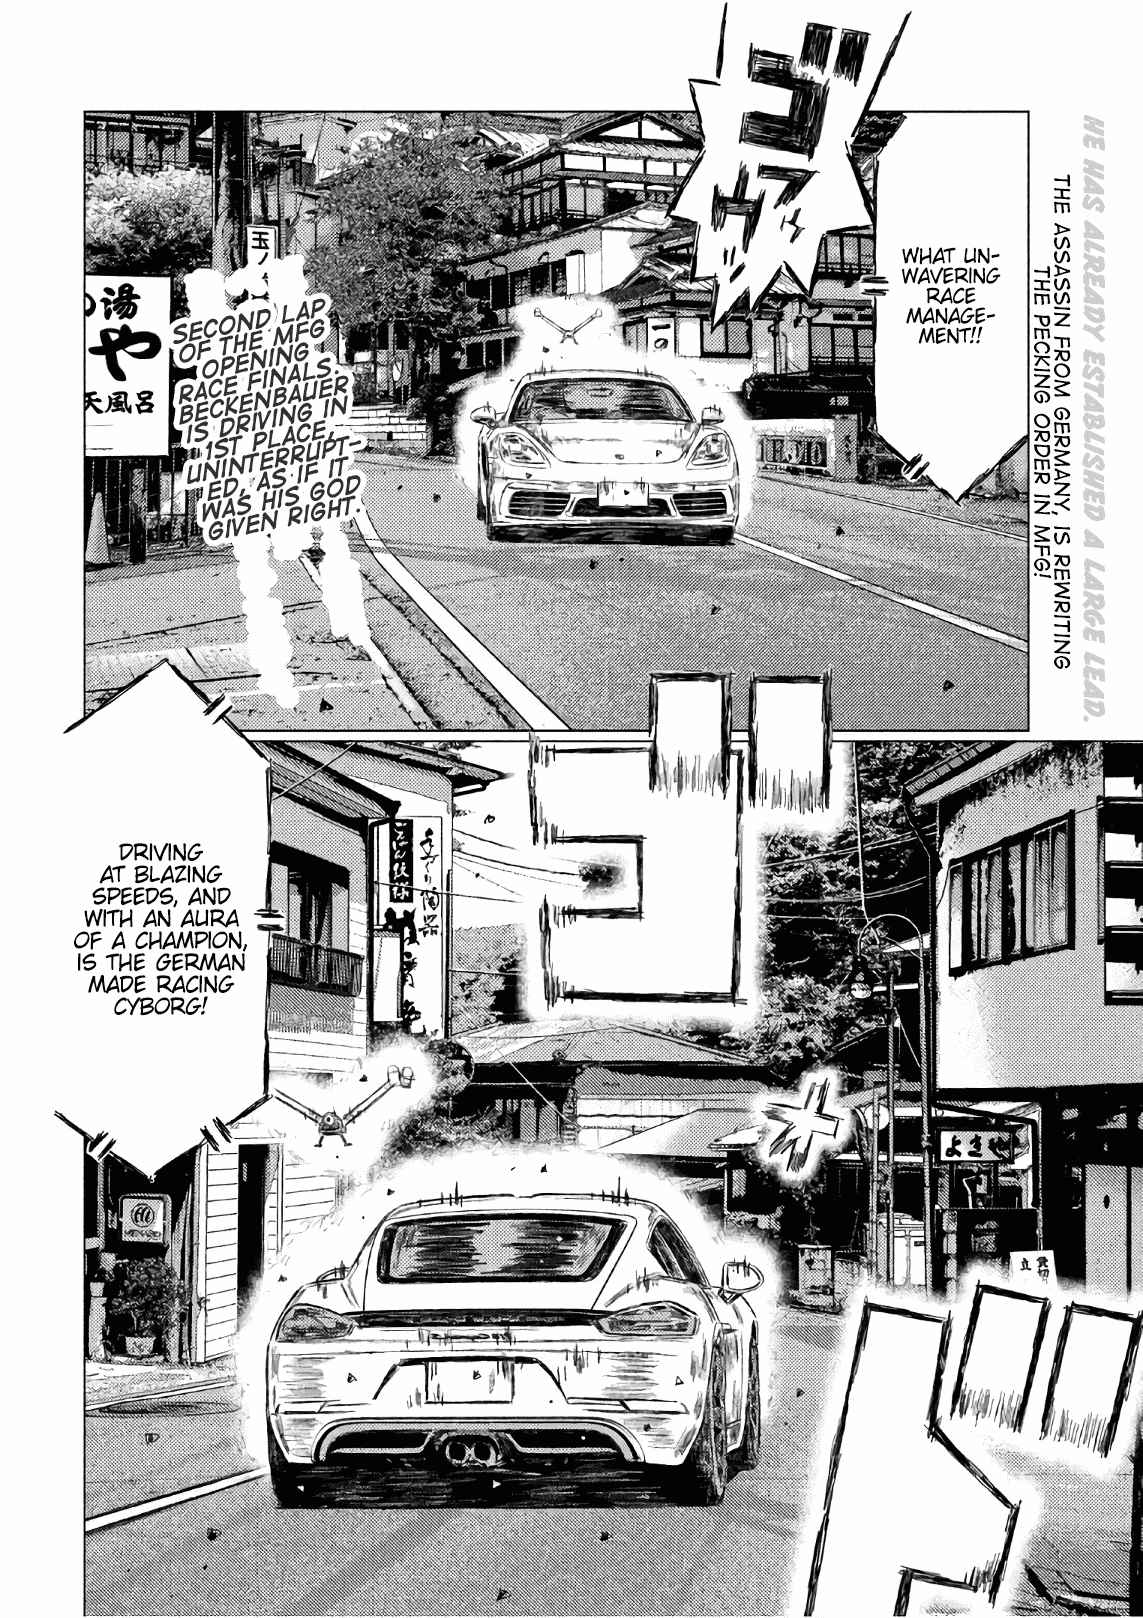 MF Ghost Vol. 4 Ch. 41 Two Routes